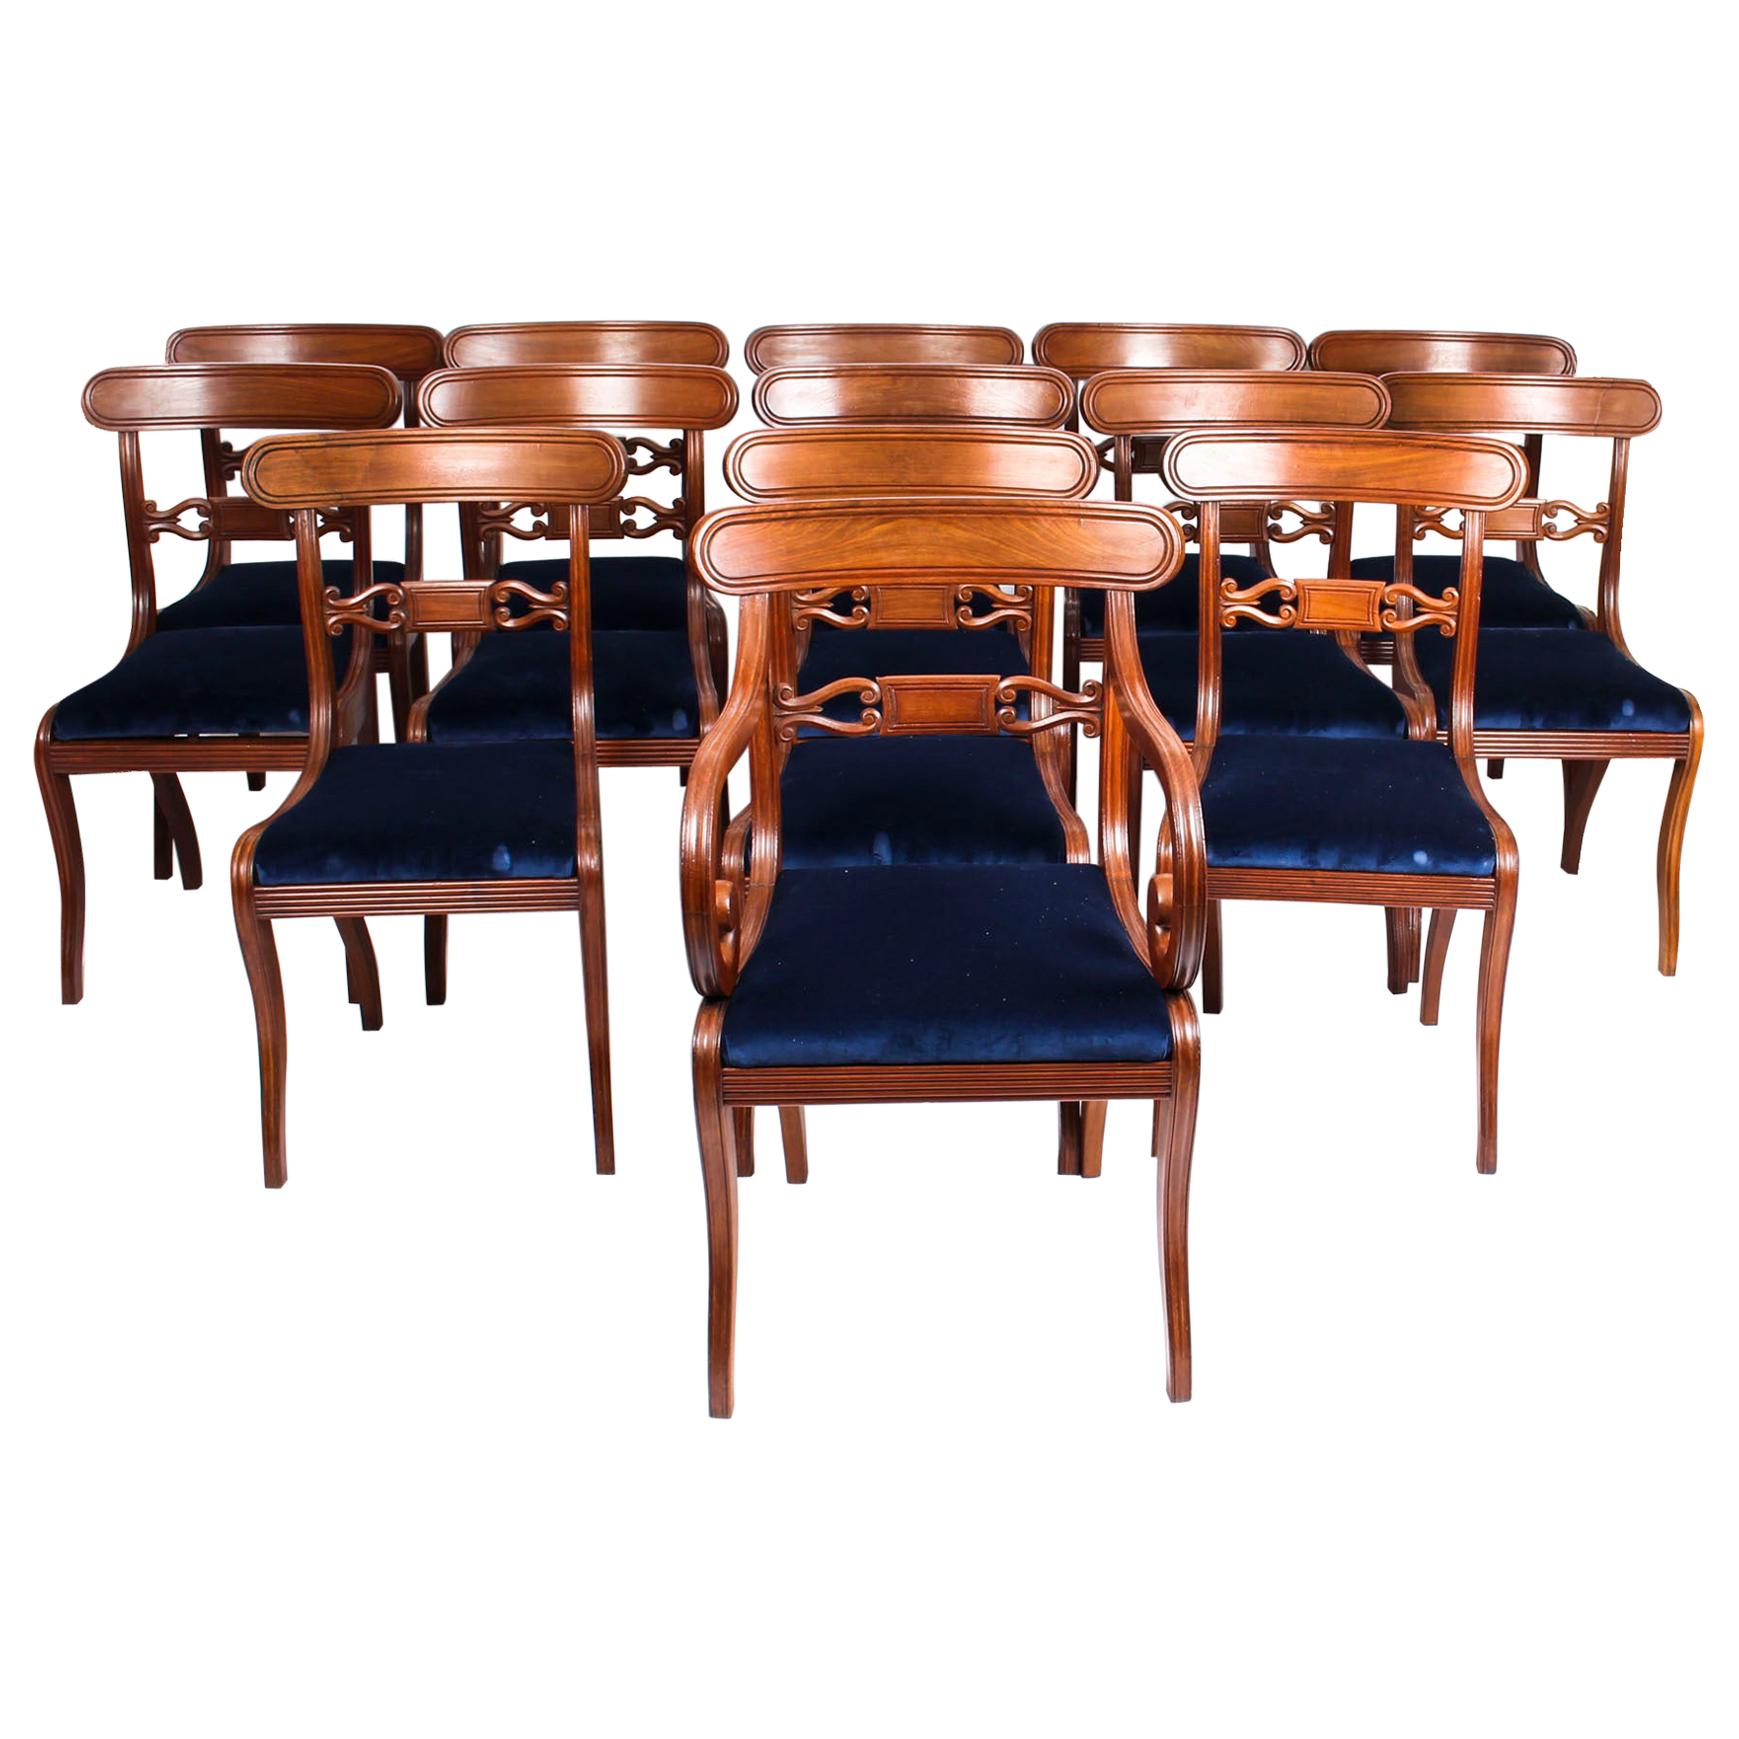 Antique Set of 14 Regency Mahogany Dining Chairs, 19th Century